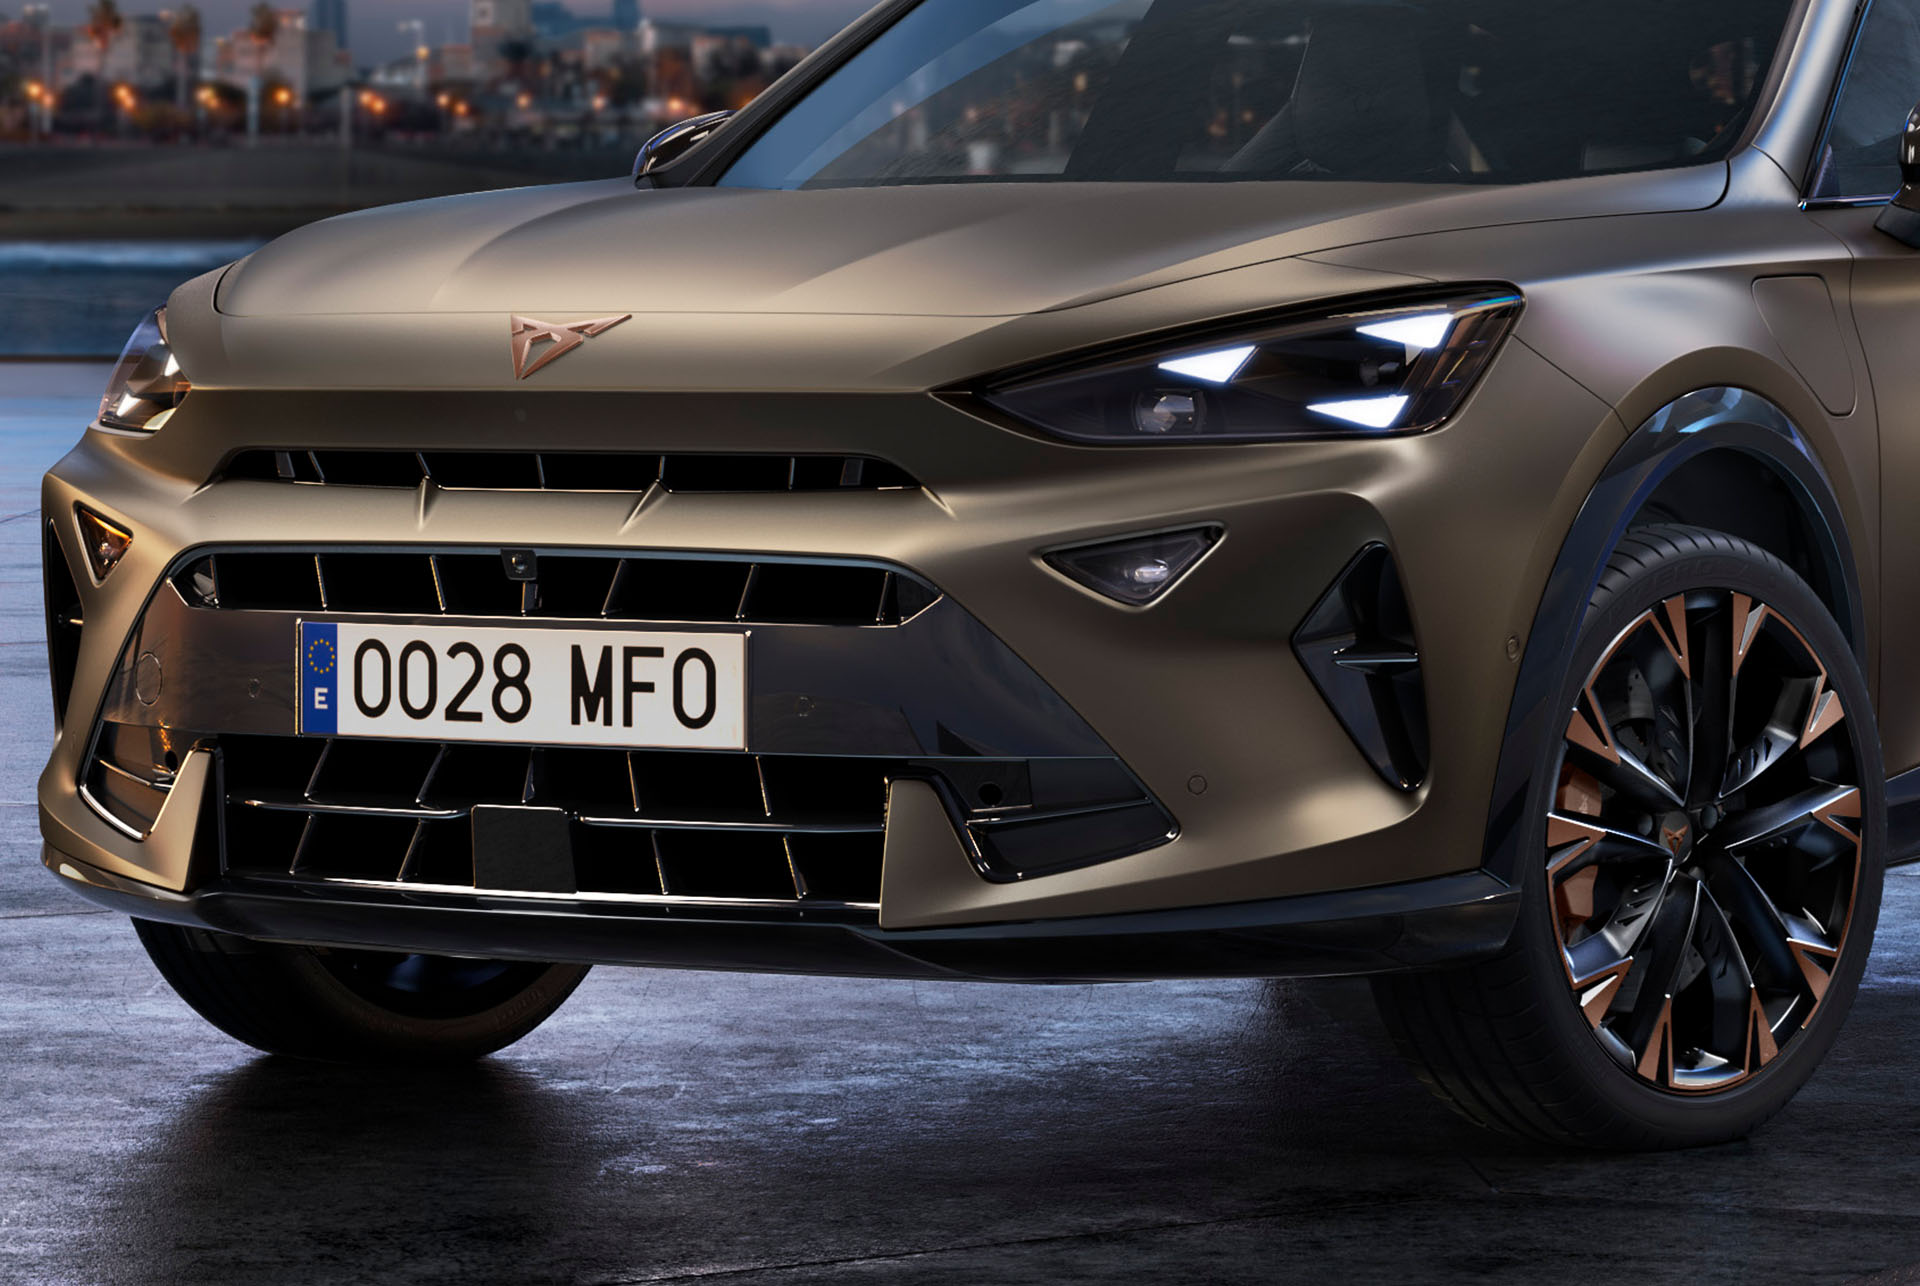 Close up of the front of a new century bronze 2024 CUPRA Formentor CUV with copper accent wheels, signature triangle eye front lights and distinctive CUPRA logo.